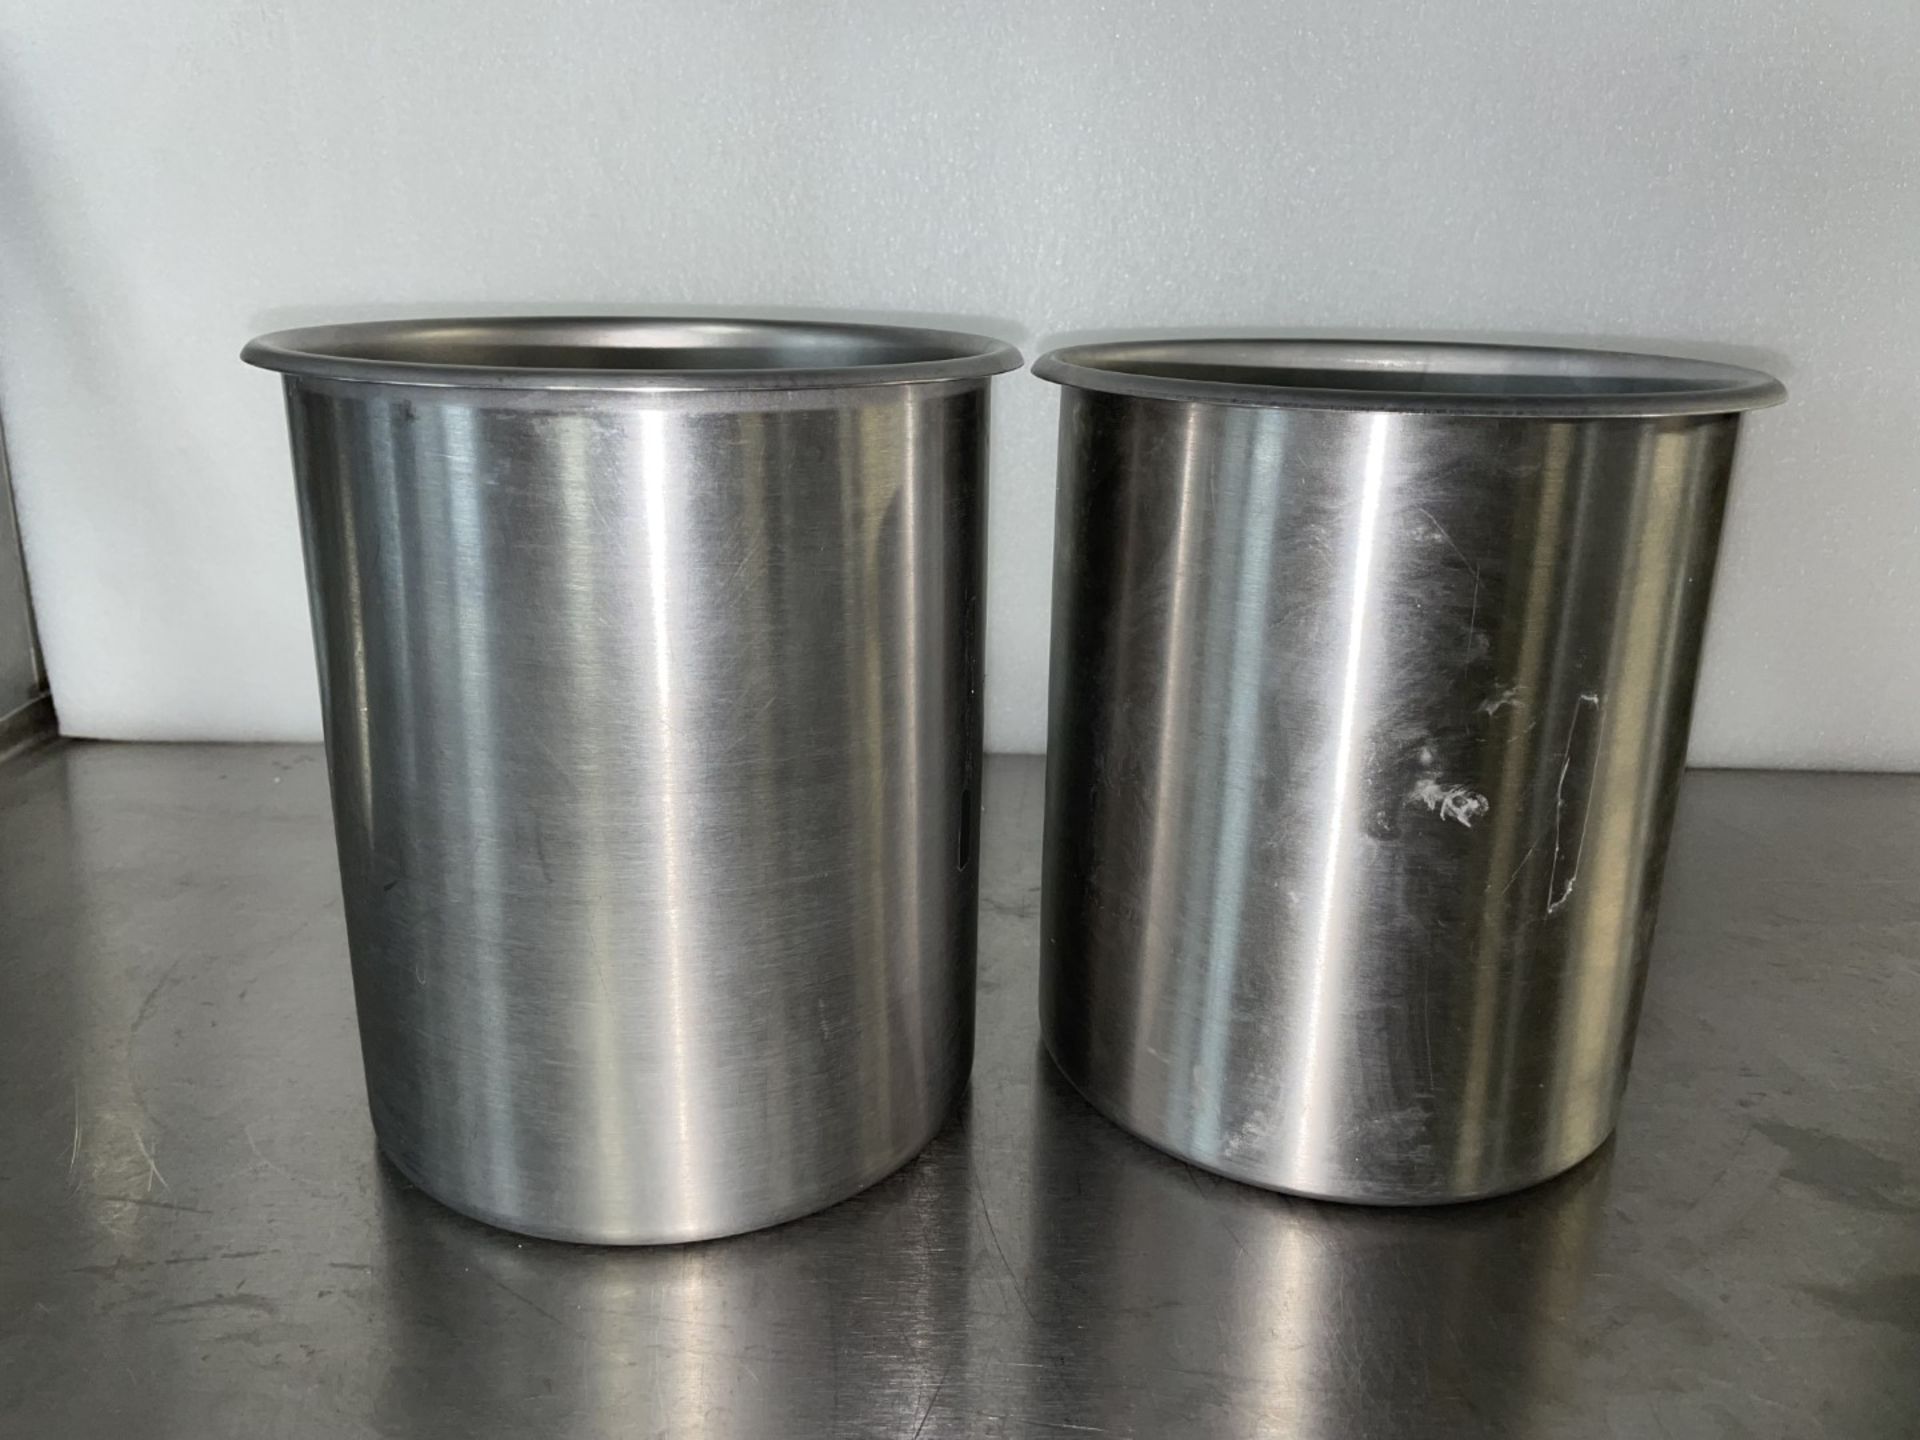 Lot of (2) 6 qt/5.68 L Polar Ware Stainless Steel Beakers